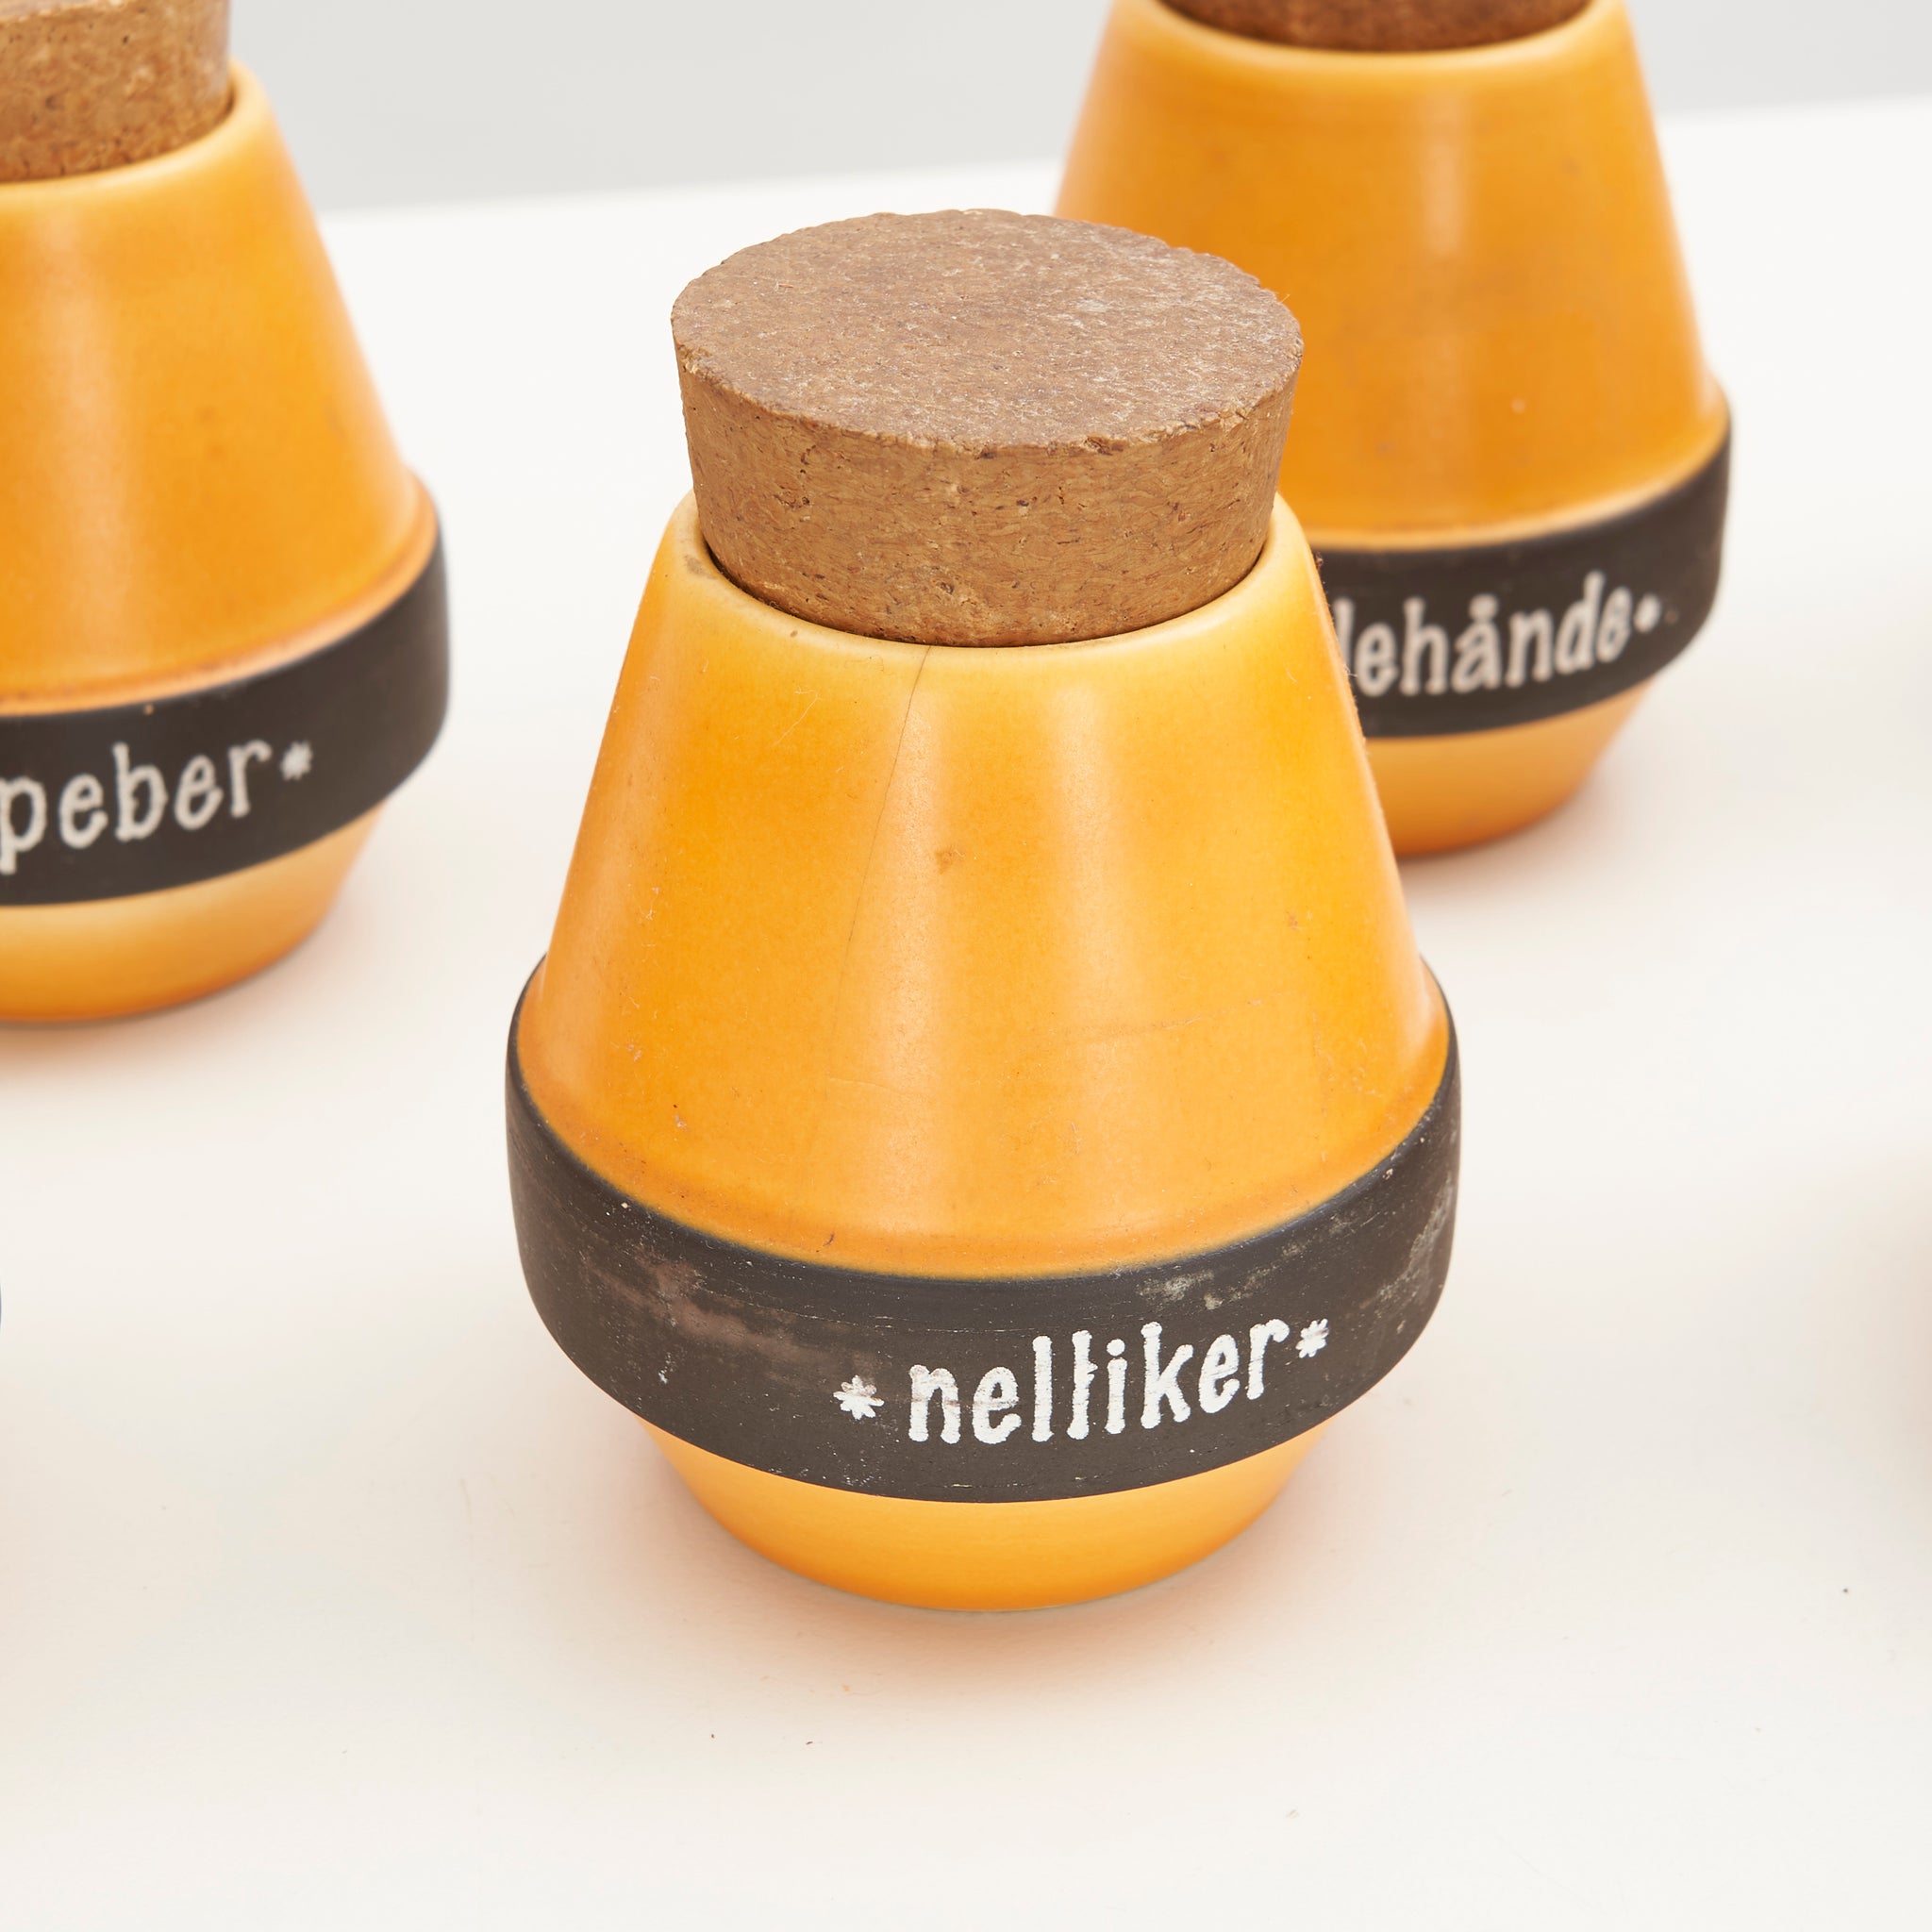 Set of 8 Ceramic Spice Containers by Søholm